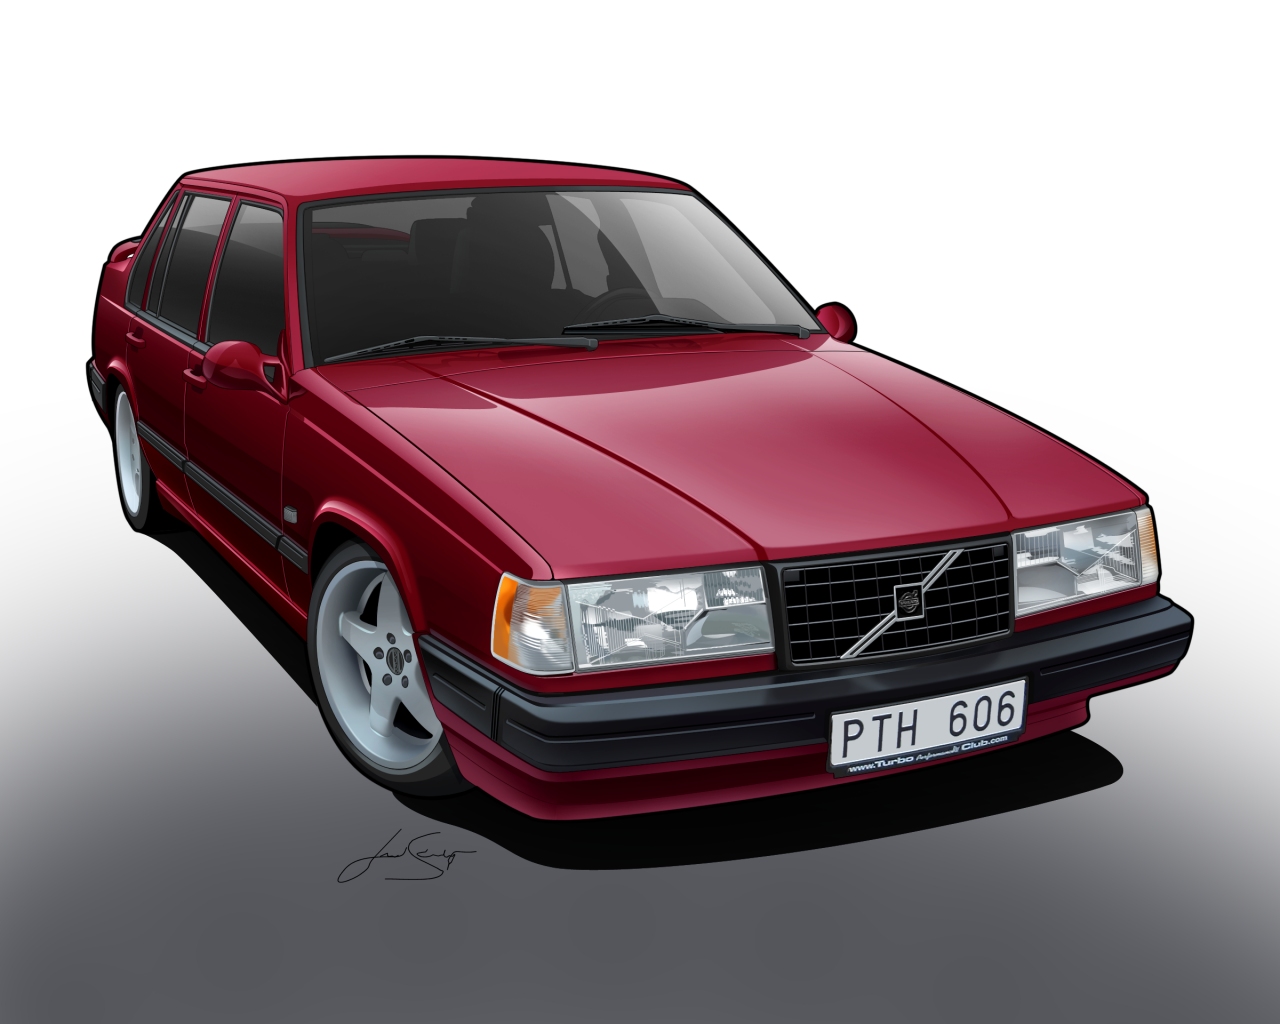 Volvo 940 Turbo Toon. by ~LindStyling on deviantART